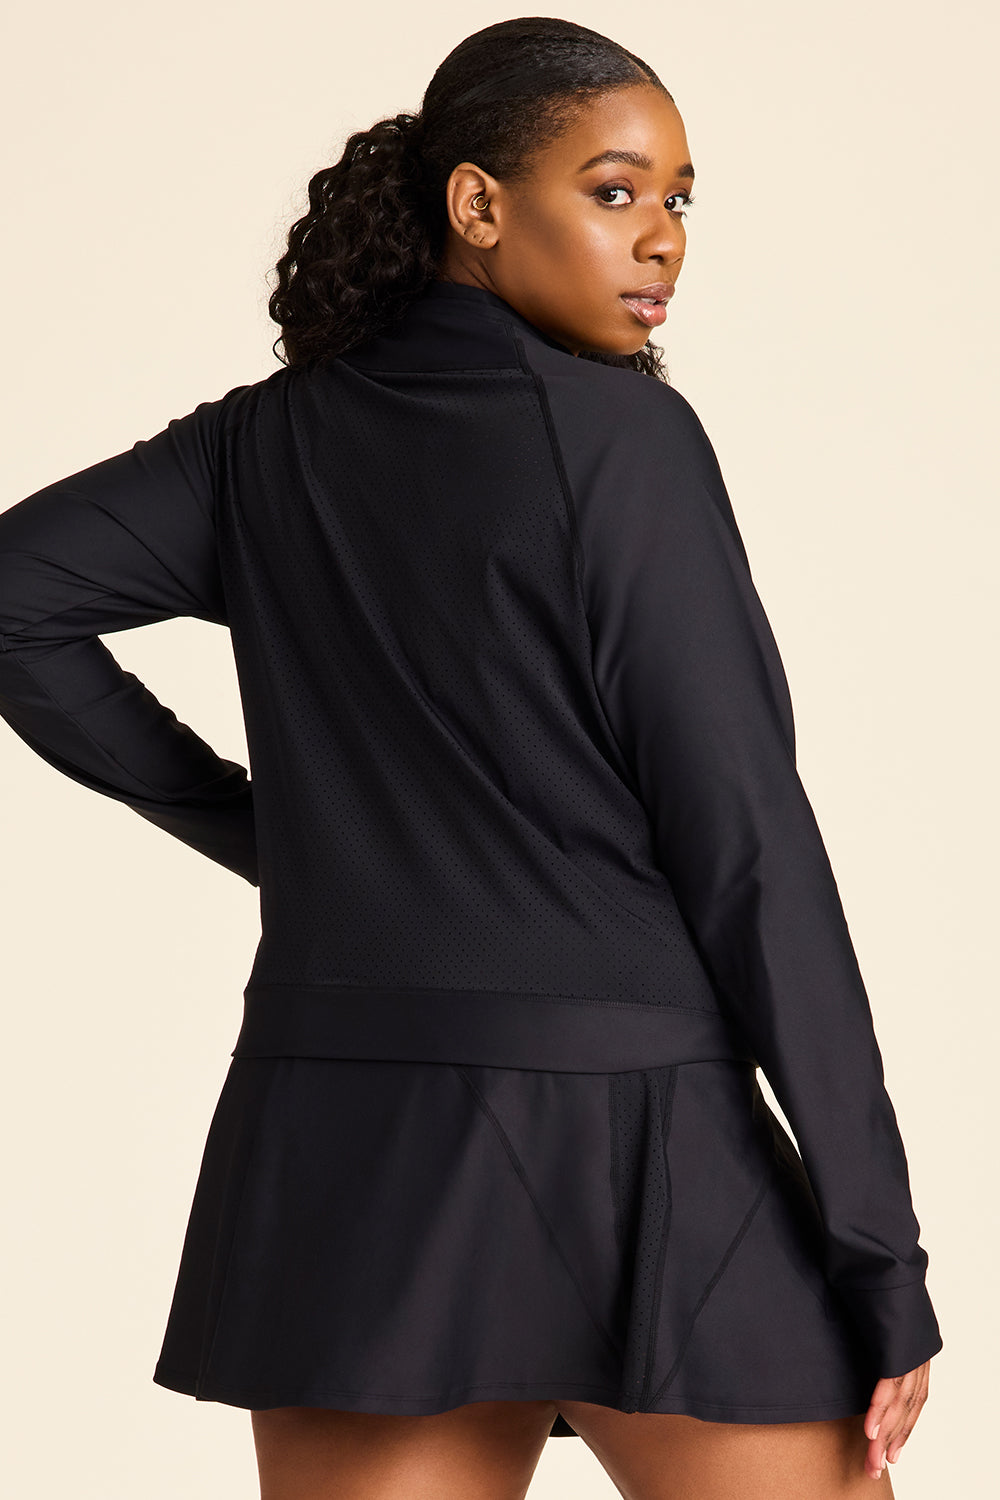 Avia Tennis Athletic Jackets for Women